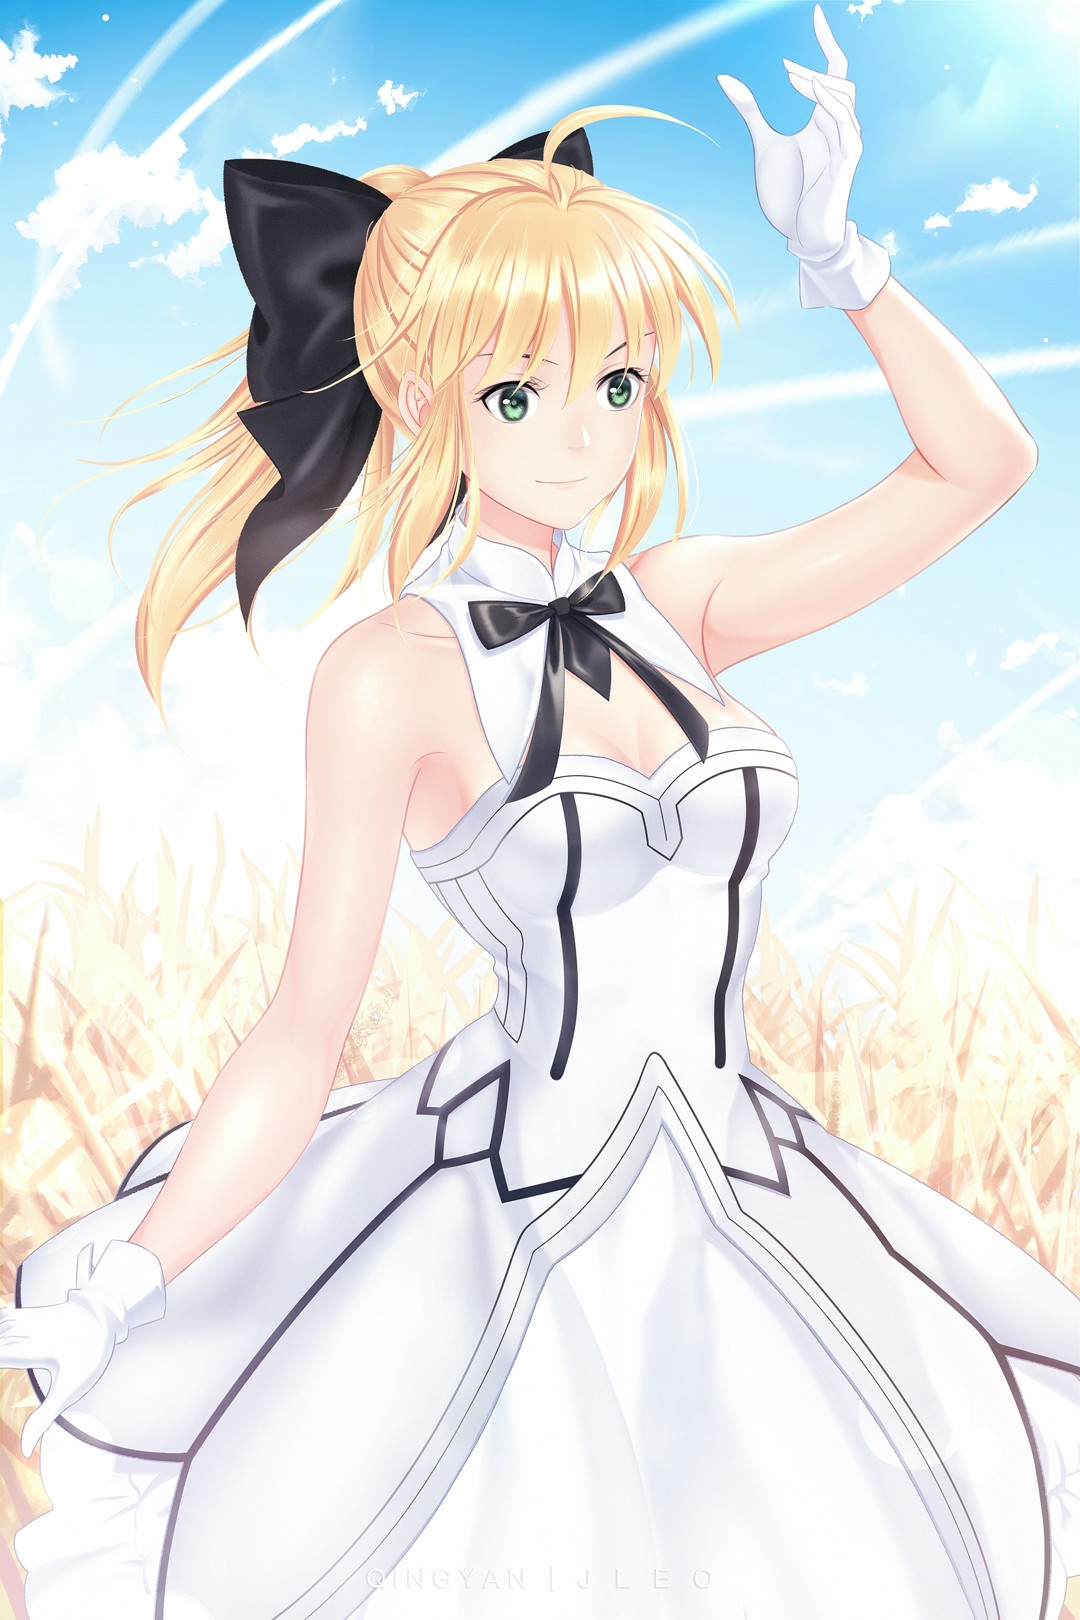 Anime 1080x1620 anime anime girls Fate series Fate/Unlimited Codes  Fate/Grand Order blonde Saber Lily Artoria Pendragon